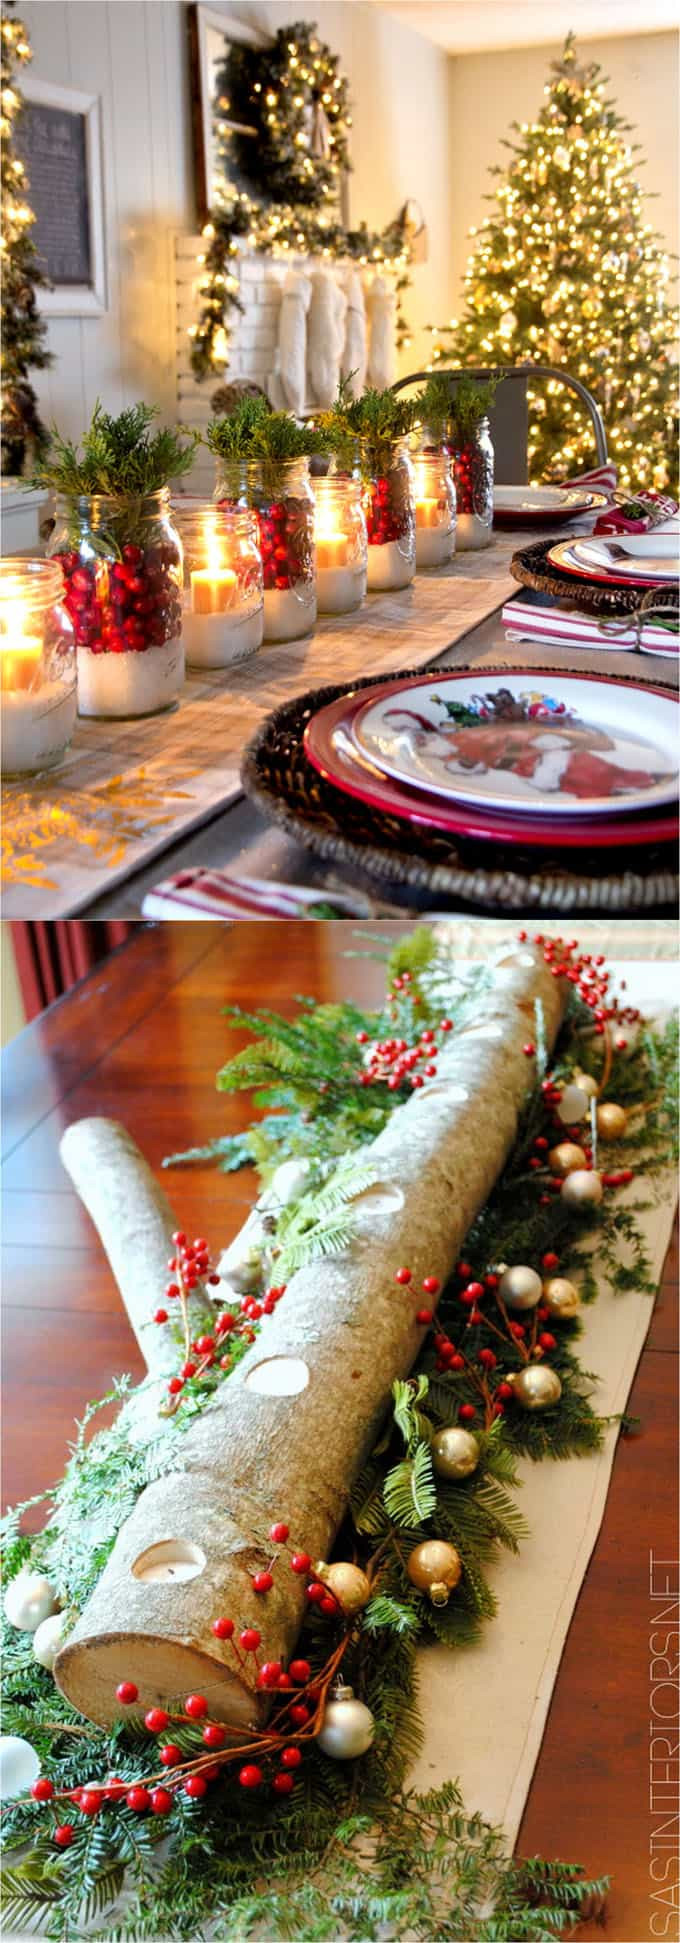 Diy Thanksgiving Table Decorations
 27 Gorgeous DIY Thanksgiving & Christmas Table Decorations